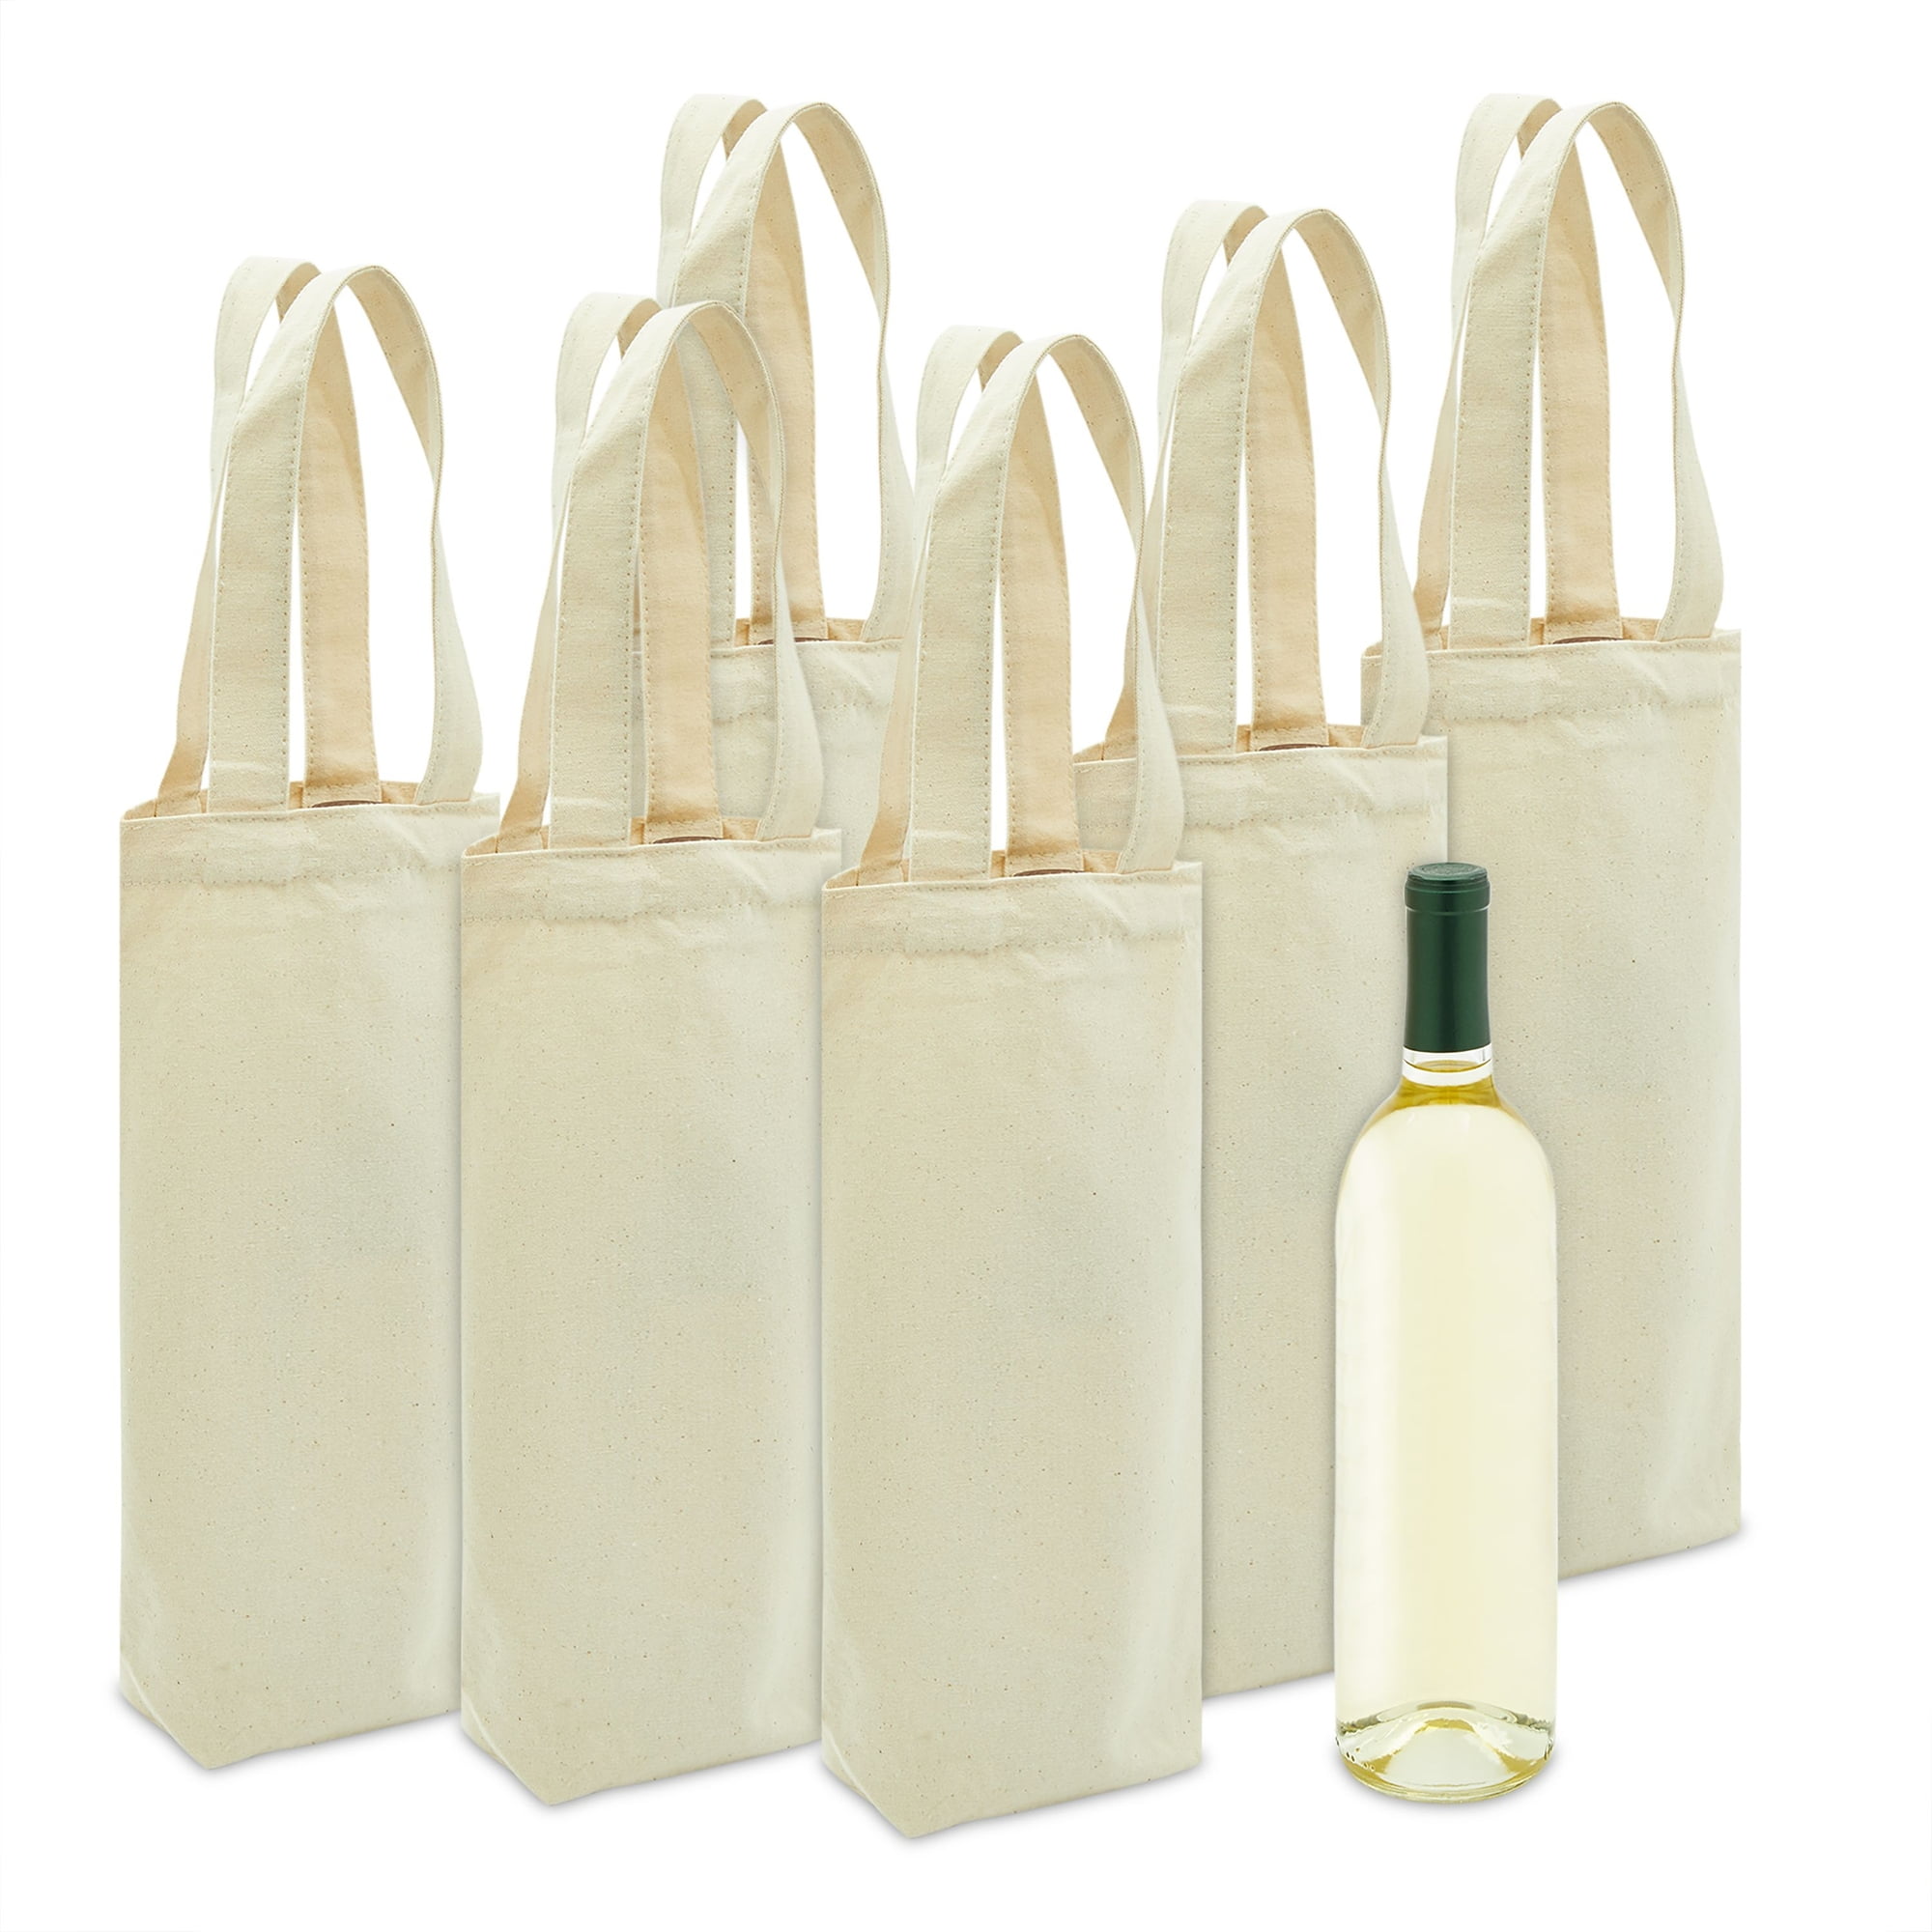 Juvale Wine Bag with Handles for Gifts, Dinner Parties, Burgundy Carrying Tote (10 Pack)